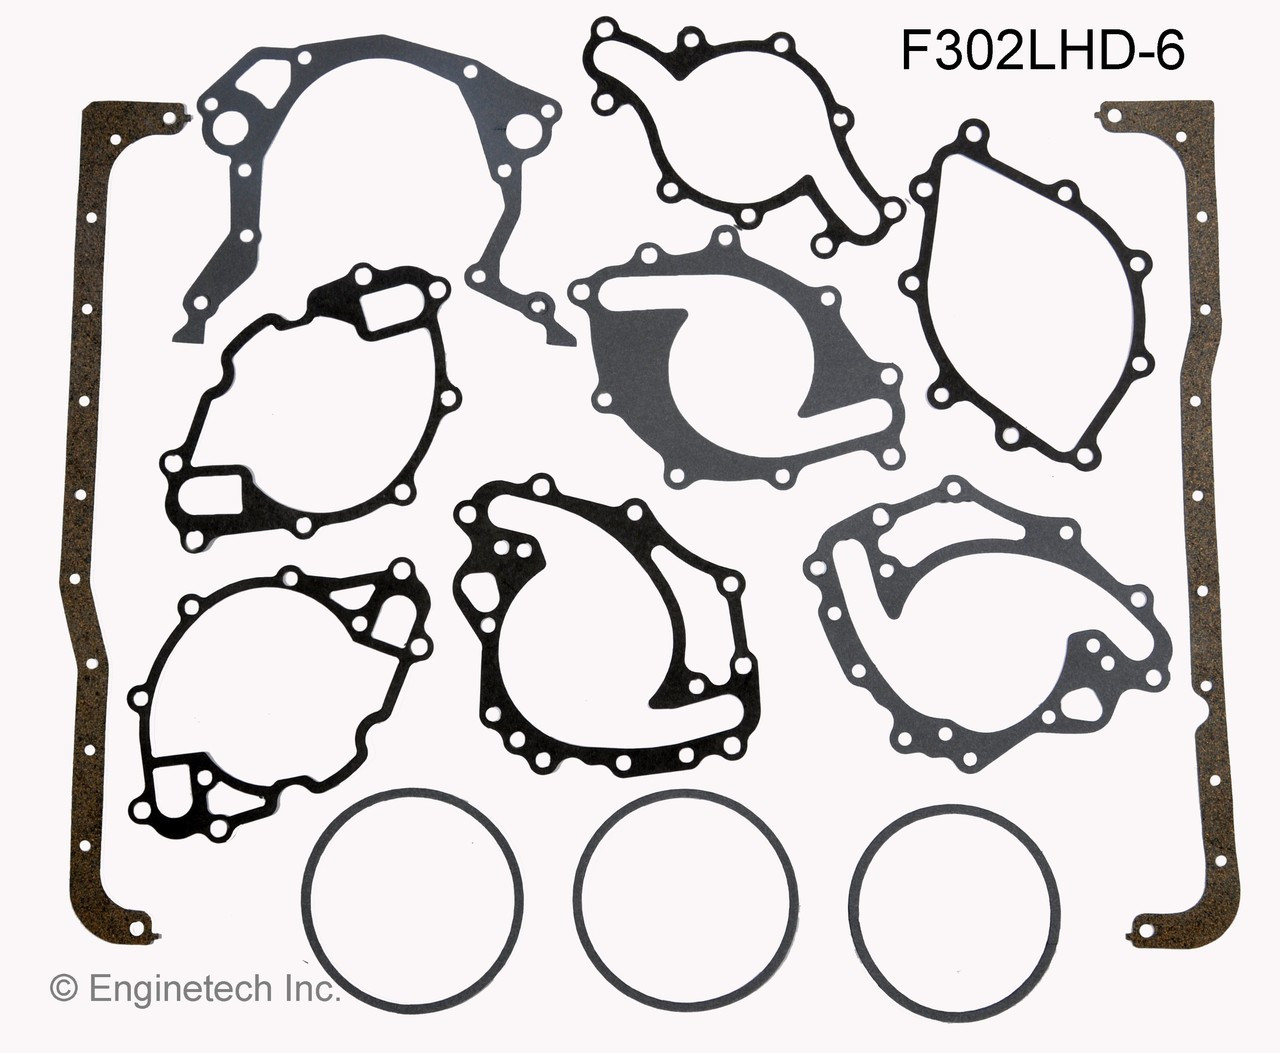 1994 Ford Mustang 5.0L Engine Gasket Set F302LHD-6 -120